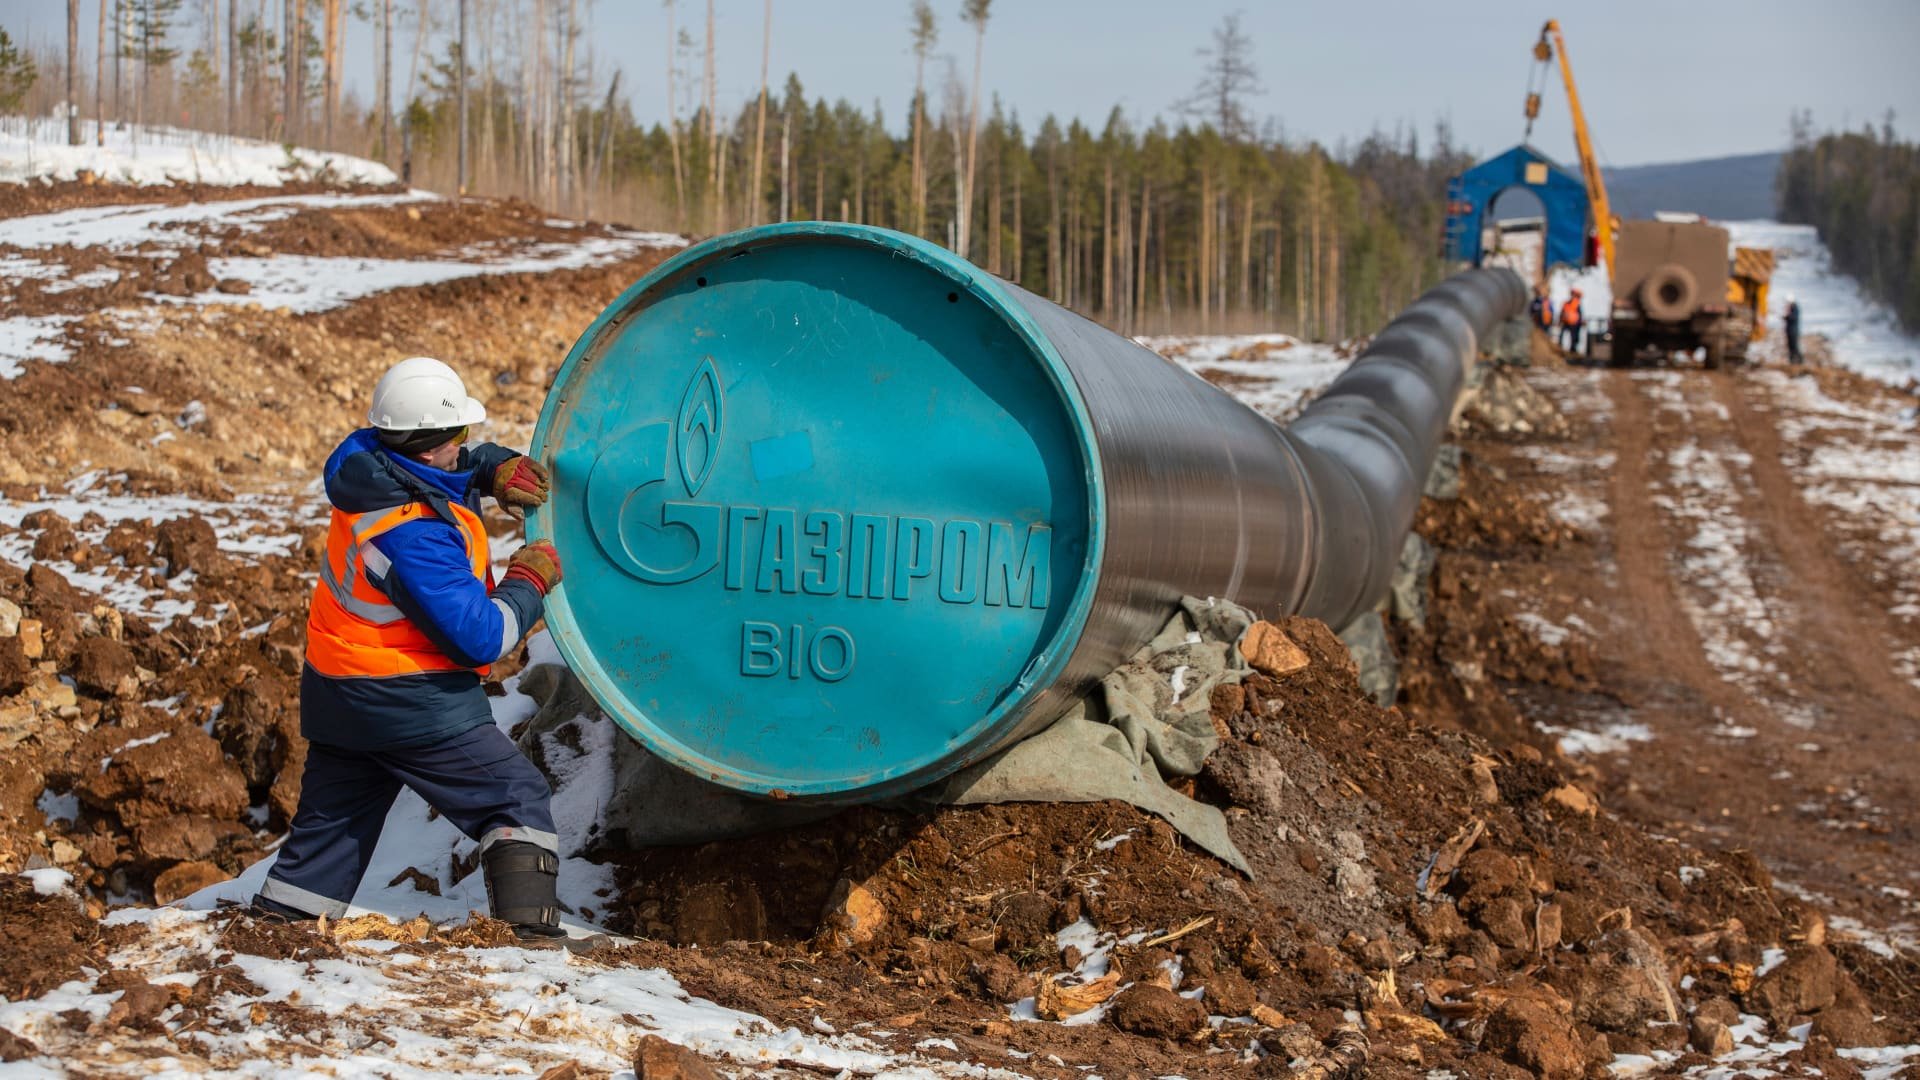 Gas is key in the Russia-Ukraine conflict — and supply could be disrupted around the world